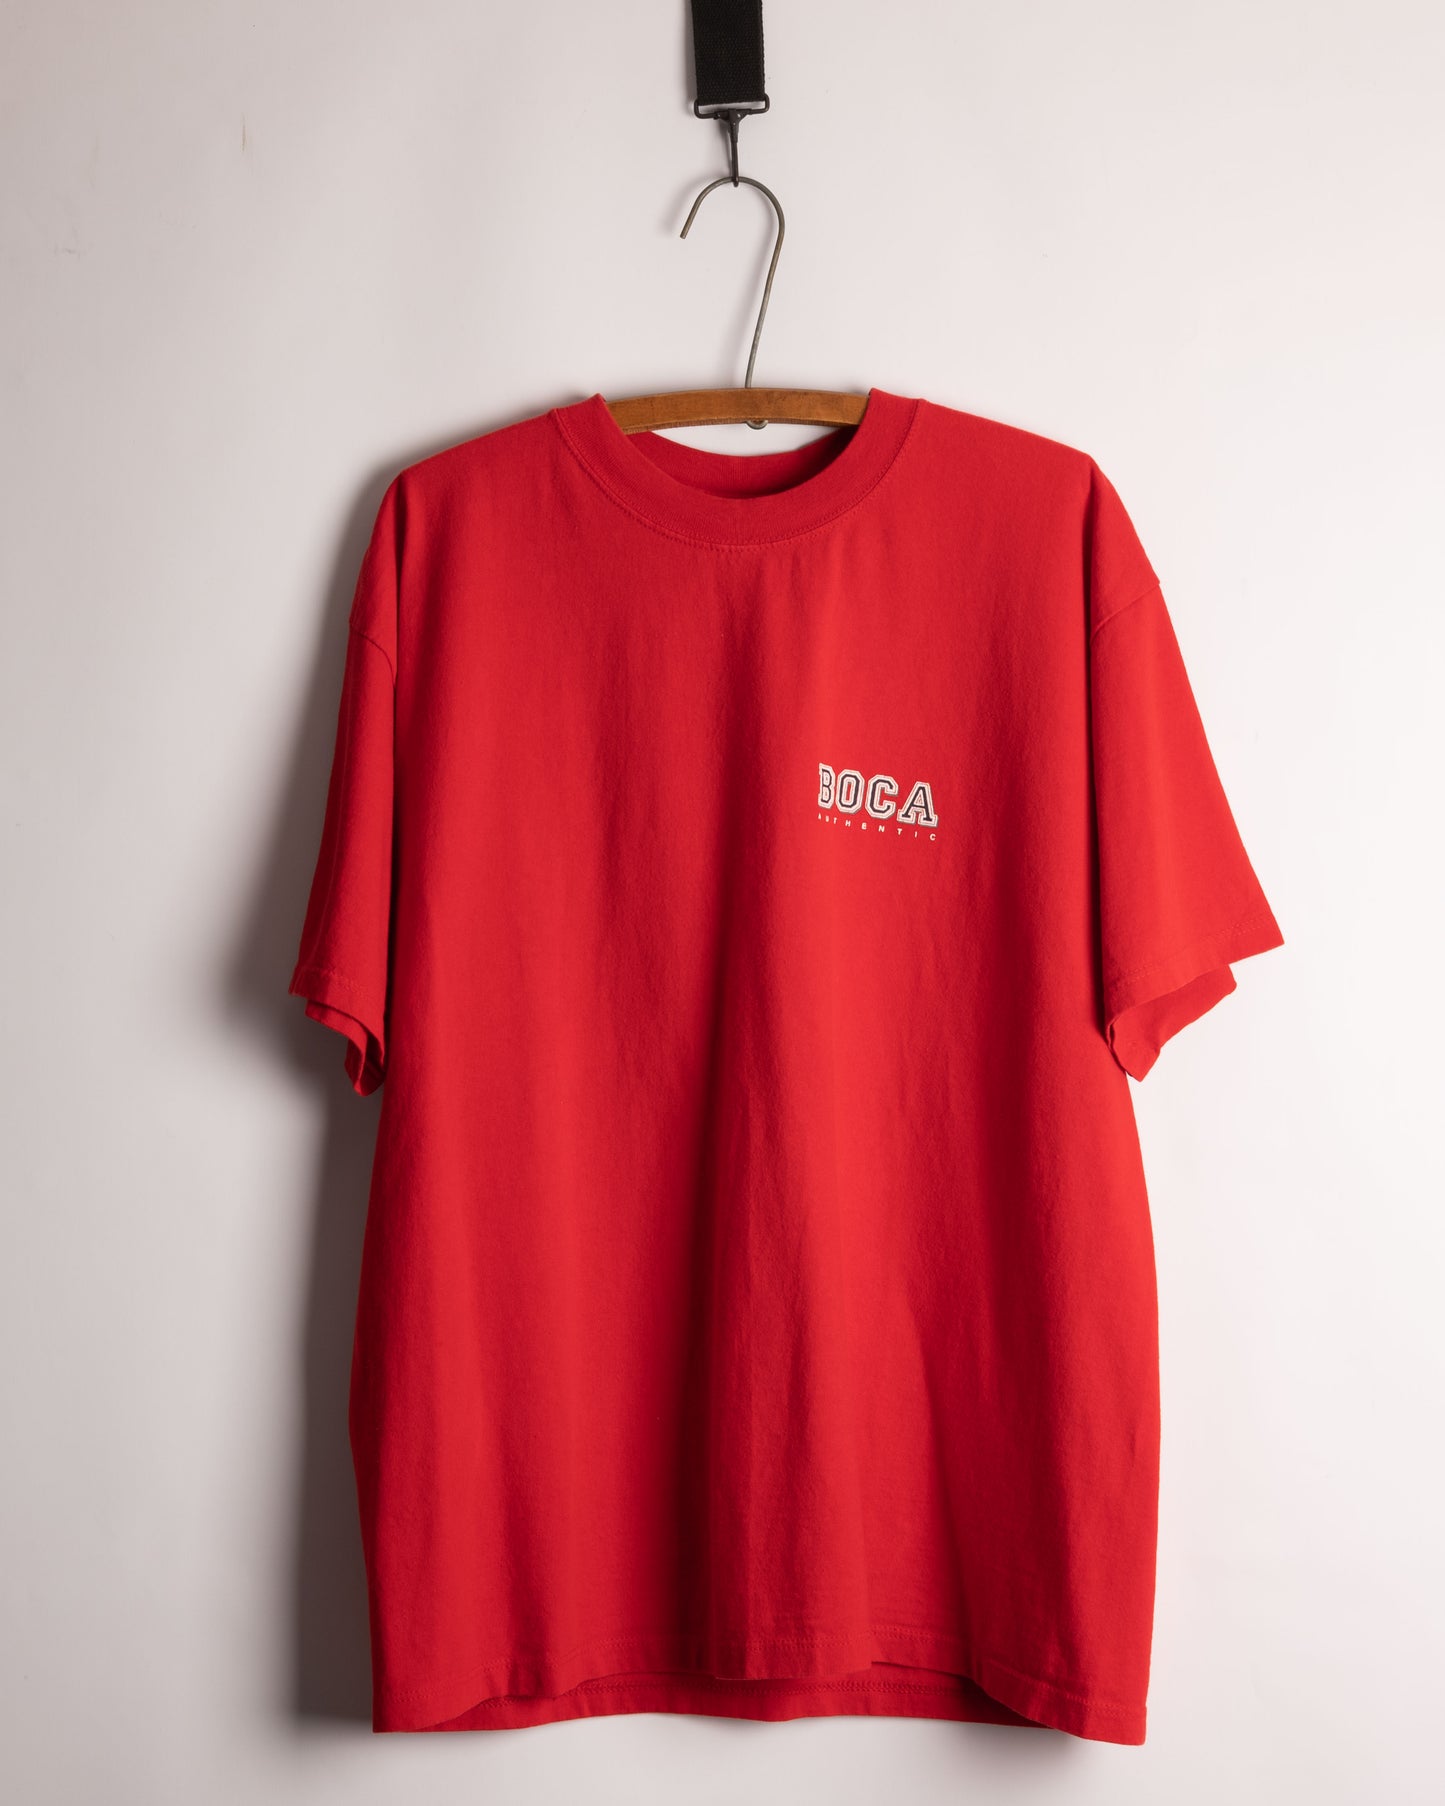 BOCA t-shirt made in Canada red cotton